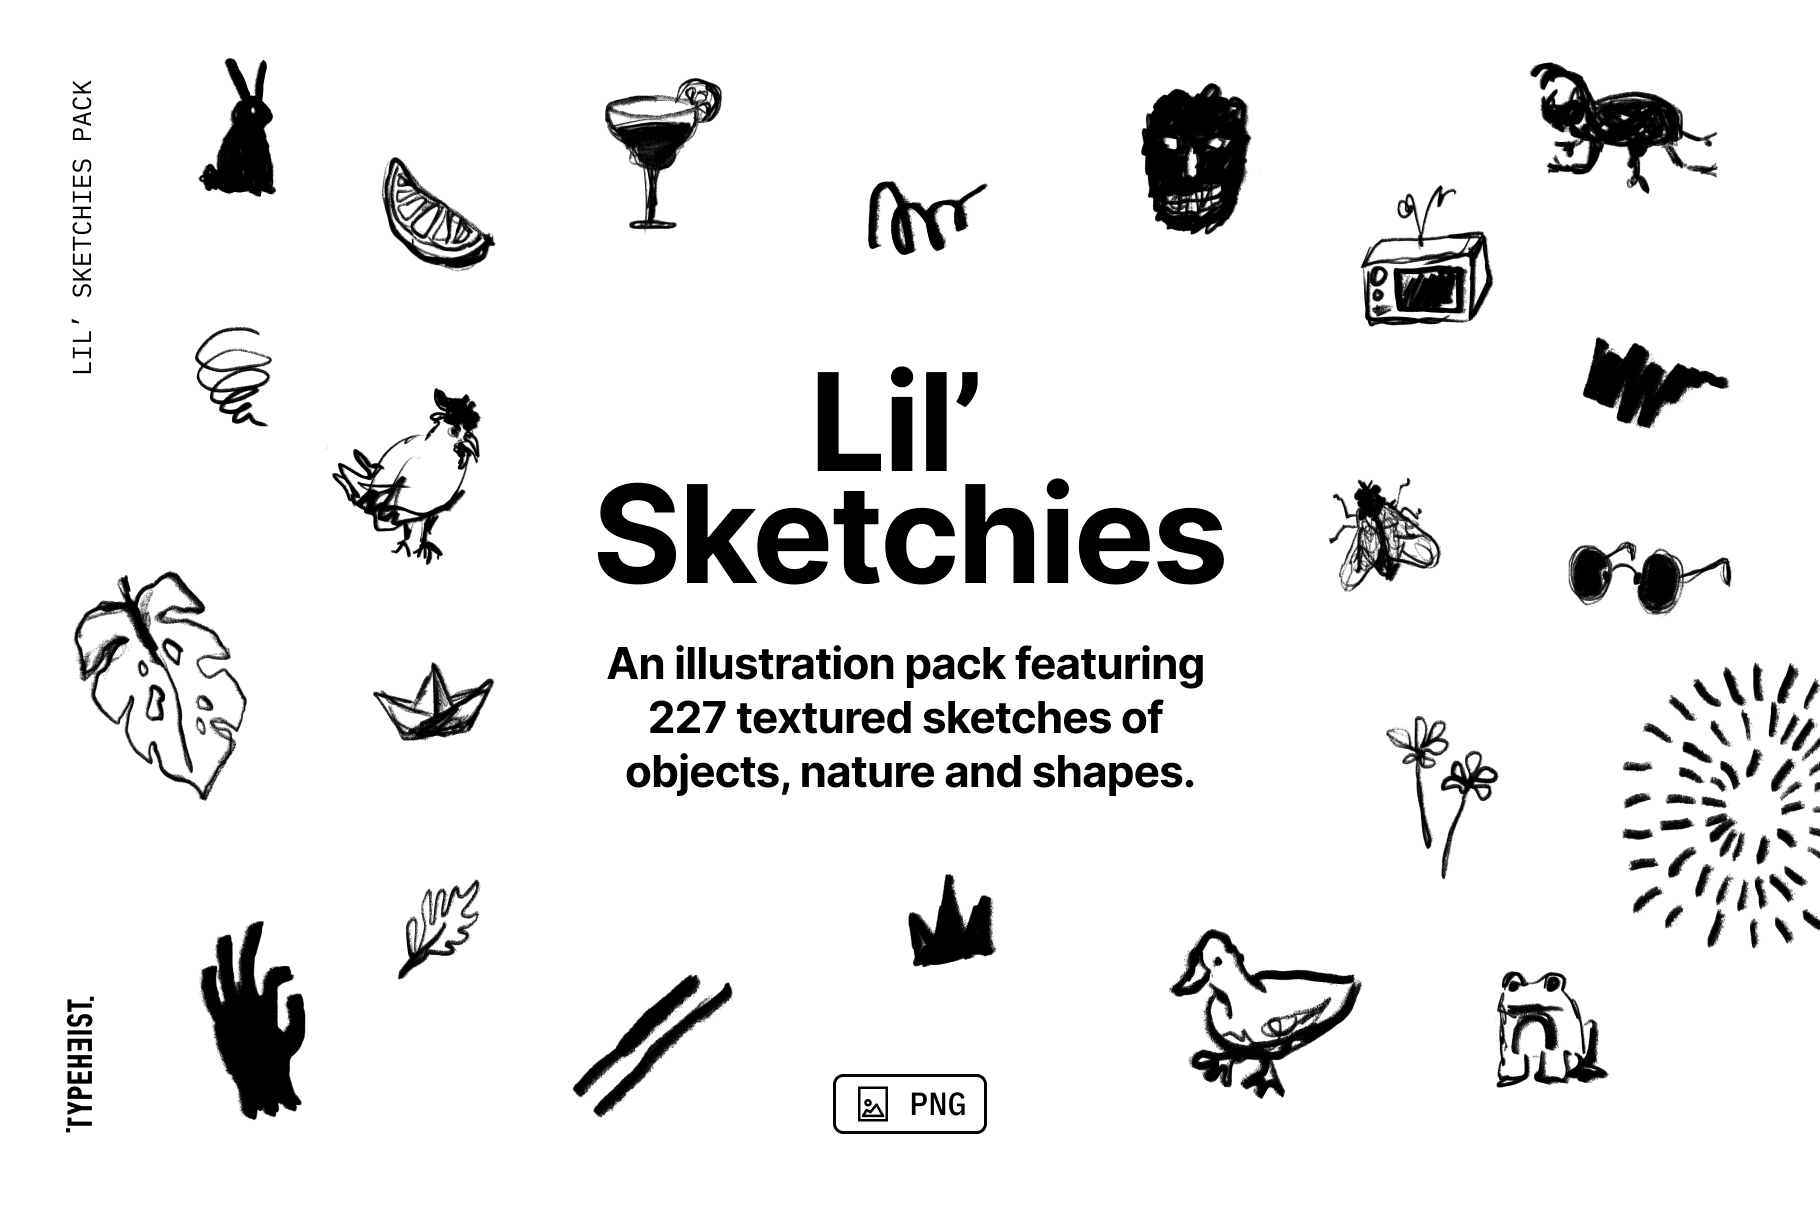 Lil’ Sketchies: Lil' Sketchies is an illustration pack featuring  227 textured sketches of  objects, nature and shapes.